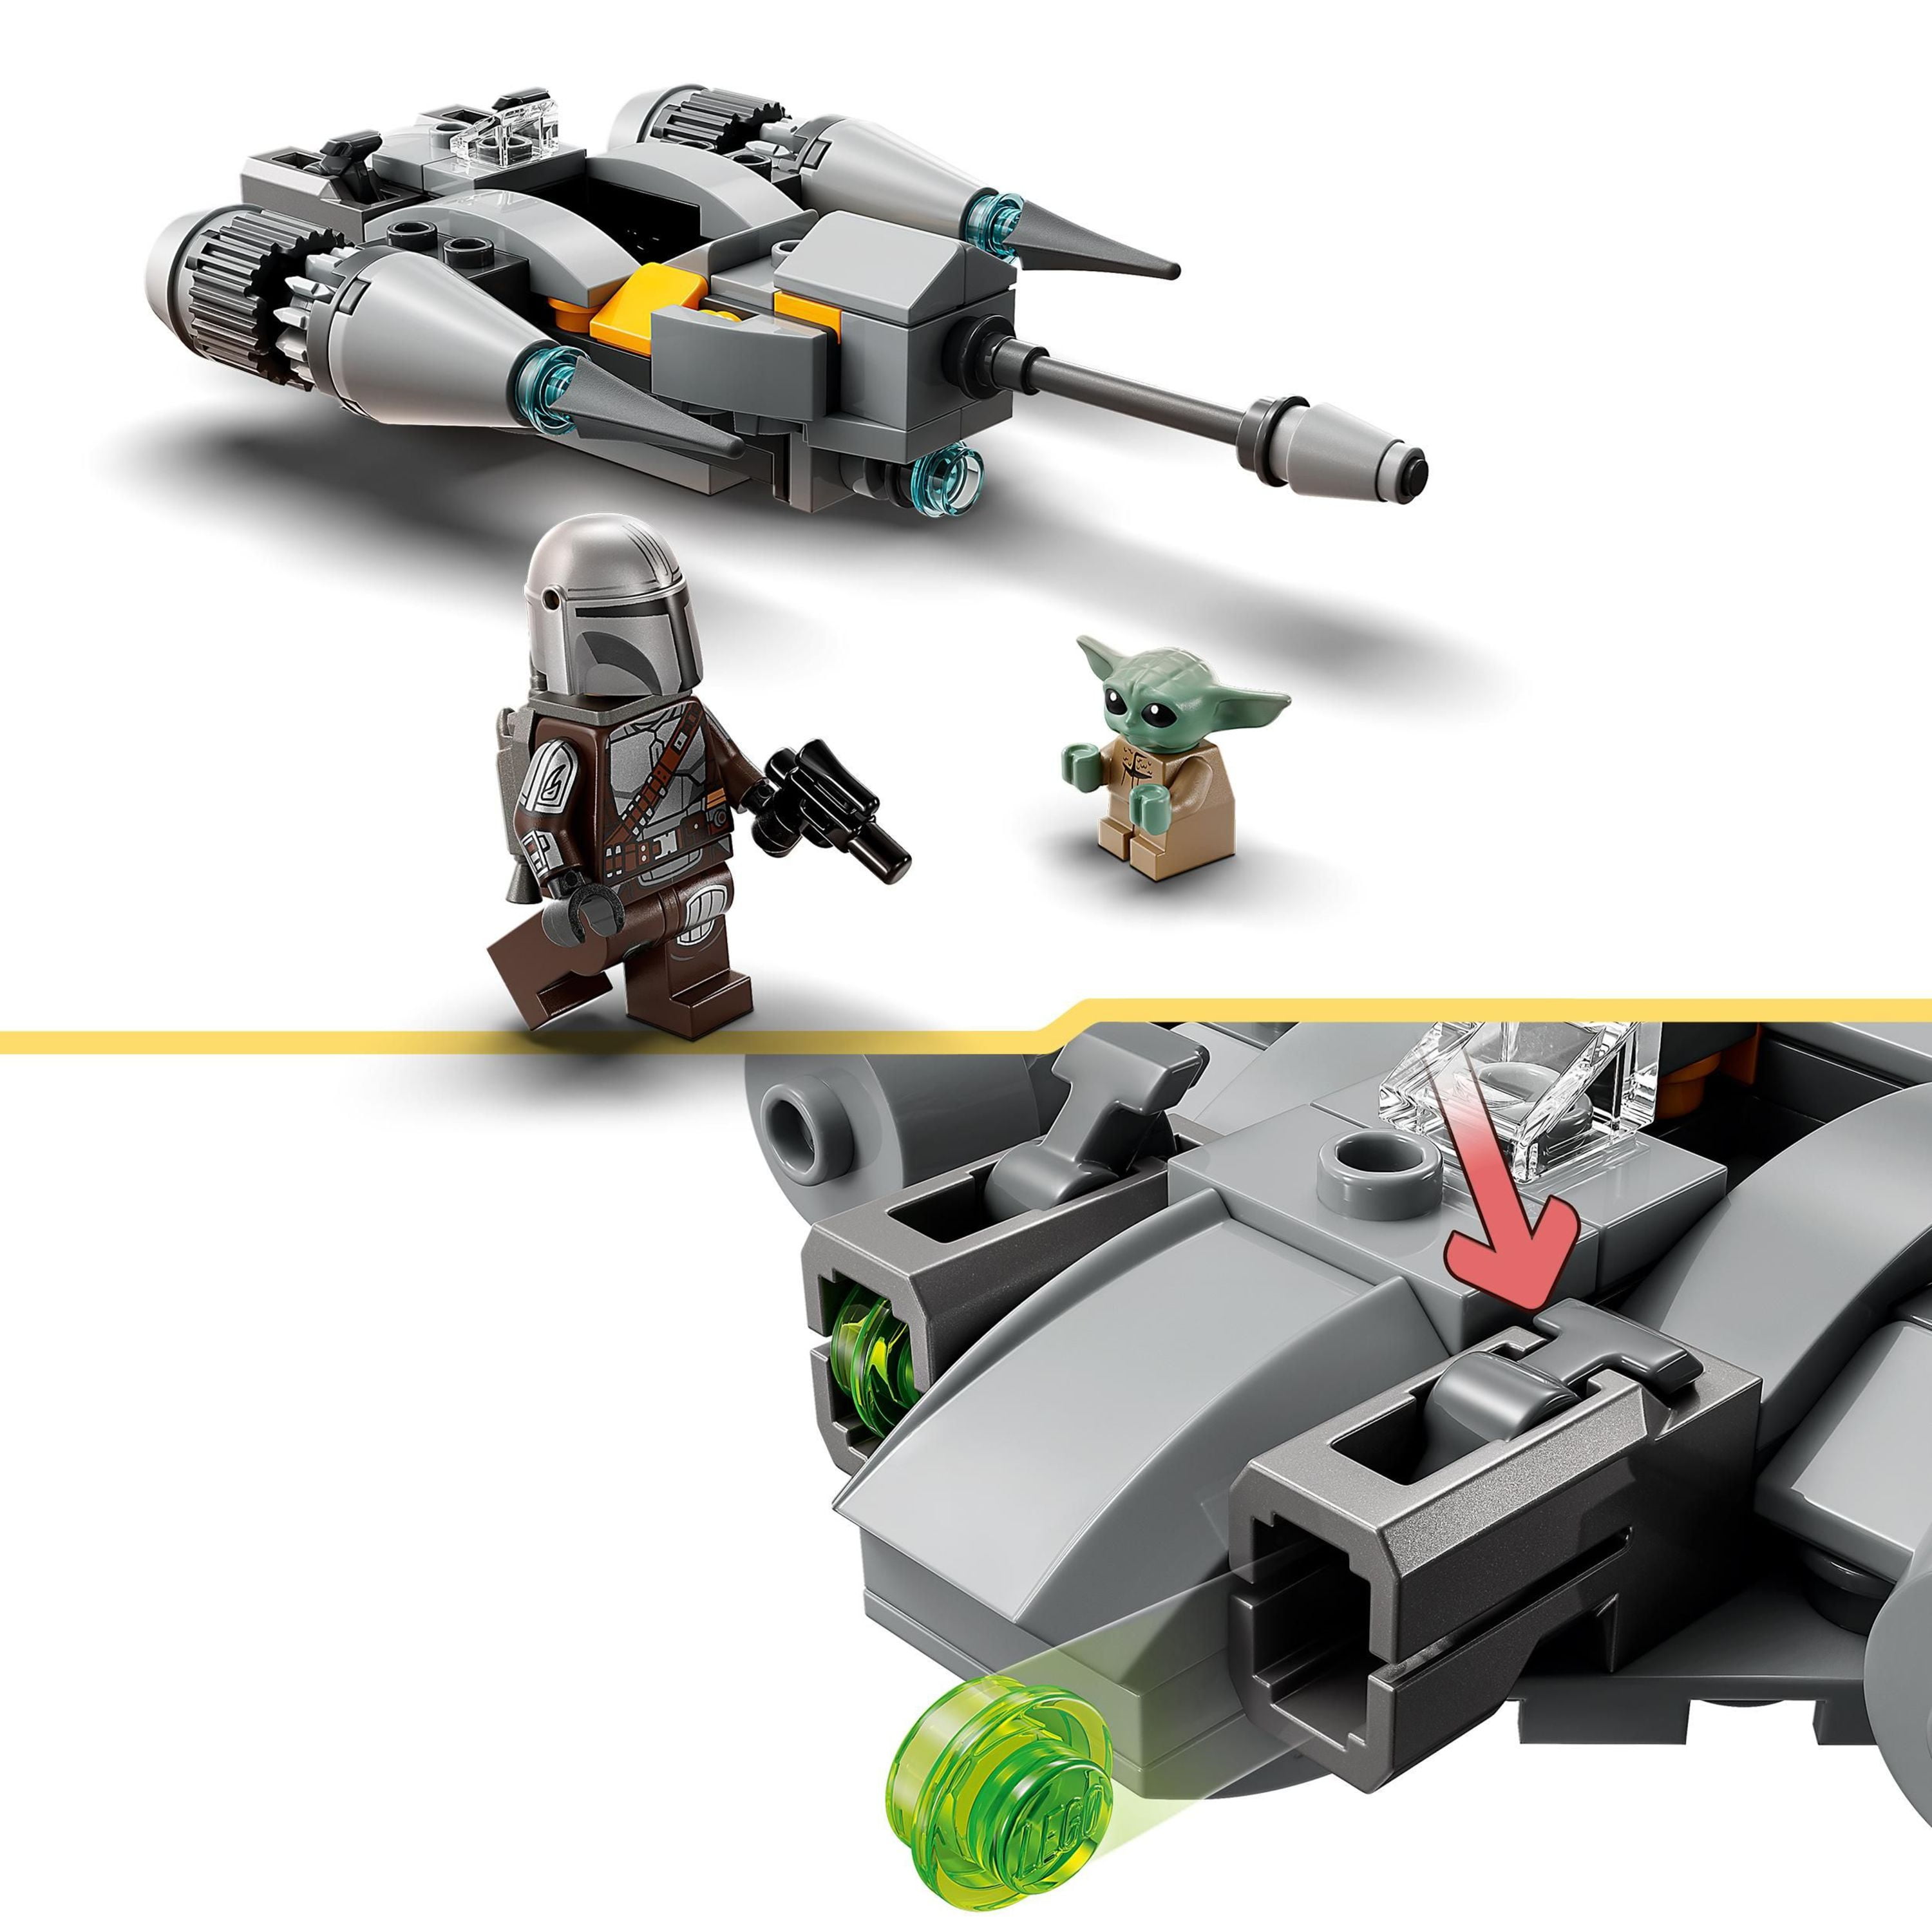 New 'The Mandalorian' N-1 Microfighter and Pirate Snub Fighter